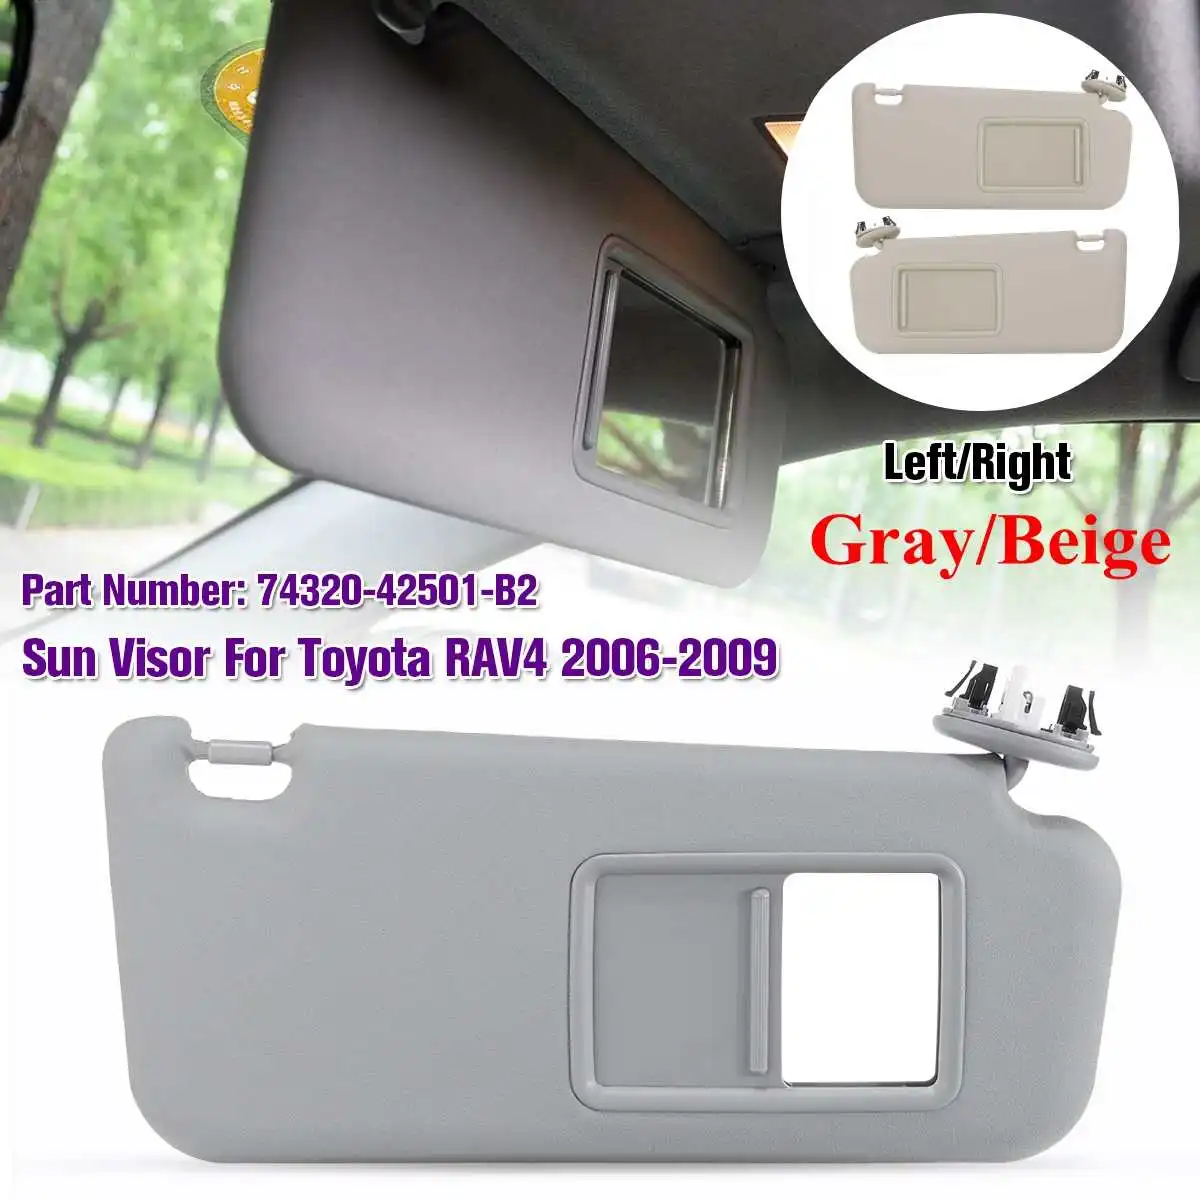 NEW 1PCS Left/Right Car accessories Gray Beige Sun Visor with Make-up Mirror and Screws For Toyota RAV4 2006-2009 74320-42501-A1